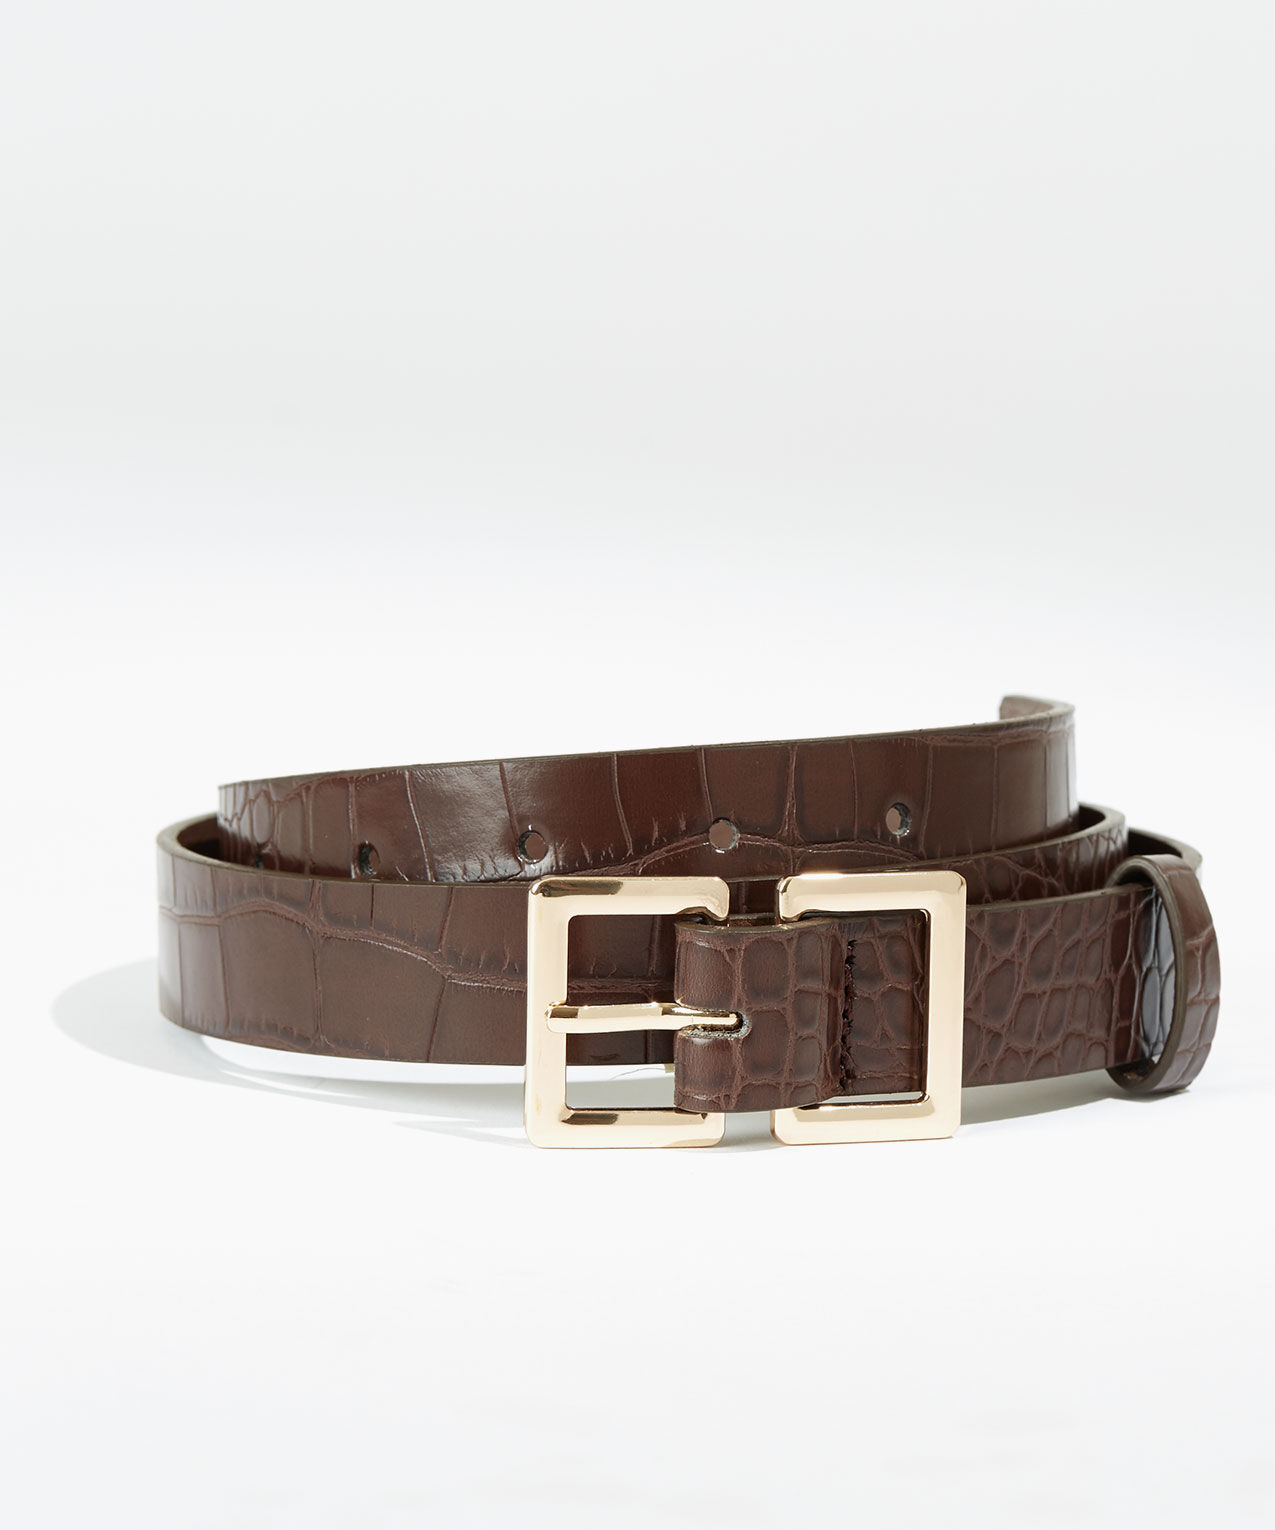 Croco Dress Belt with Square Buckle